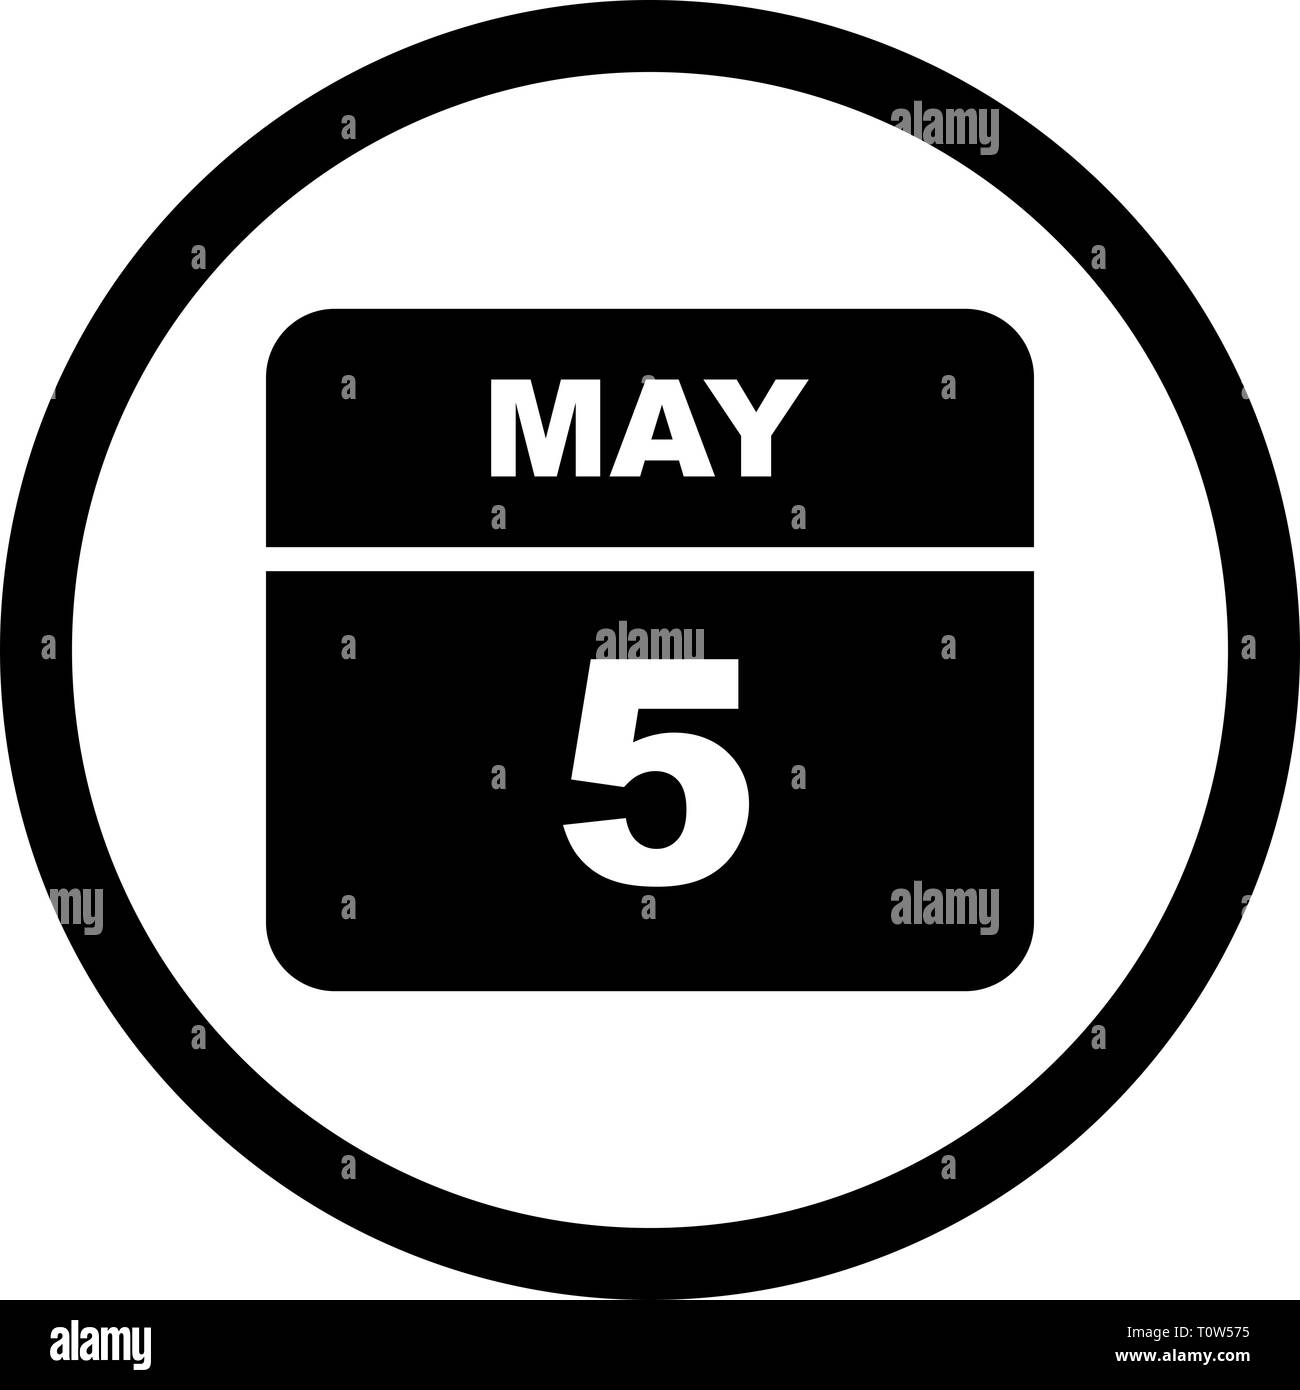 May 5th Date on a Single Day Calendar Stock Photo Alamy